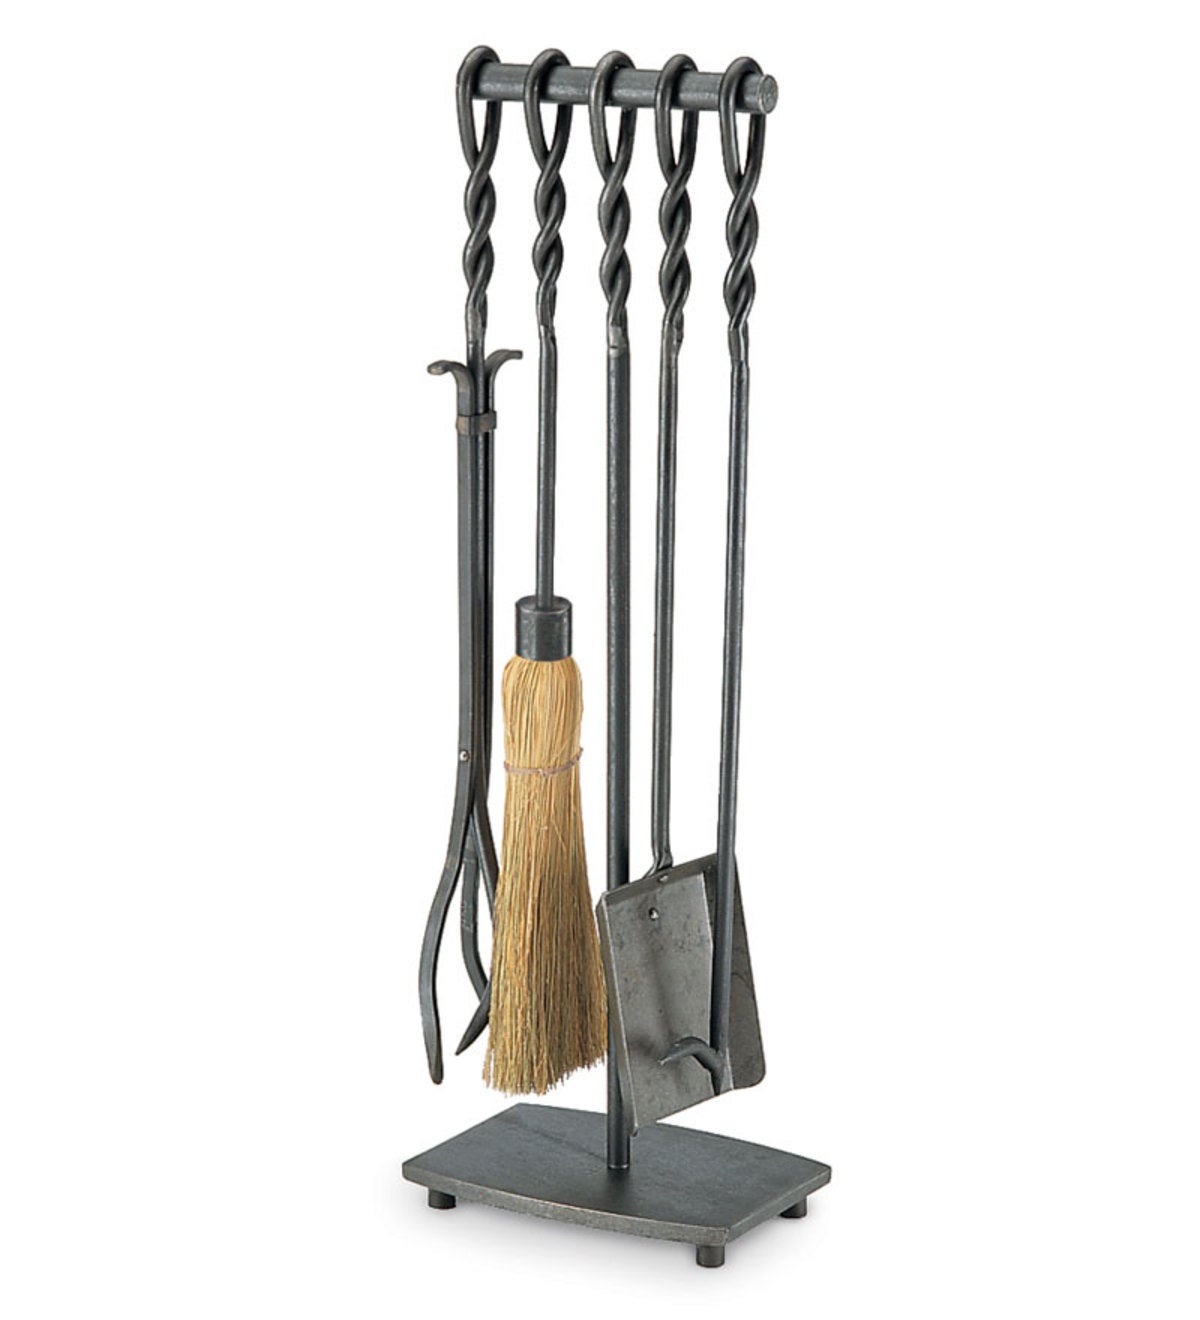 Forged Iron Soldiered Row Fireplace Tool Set